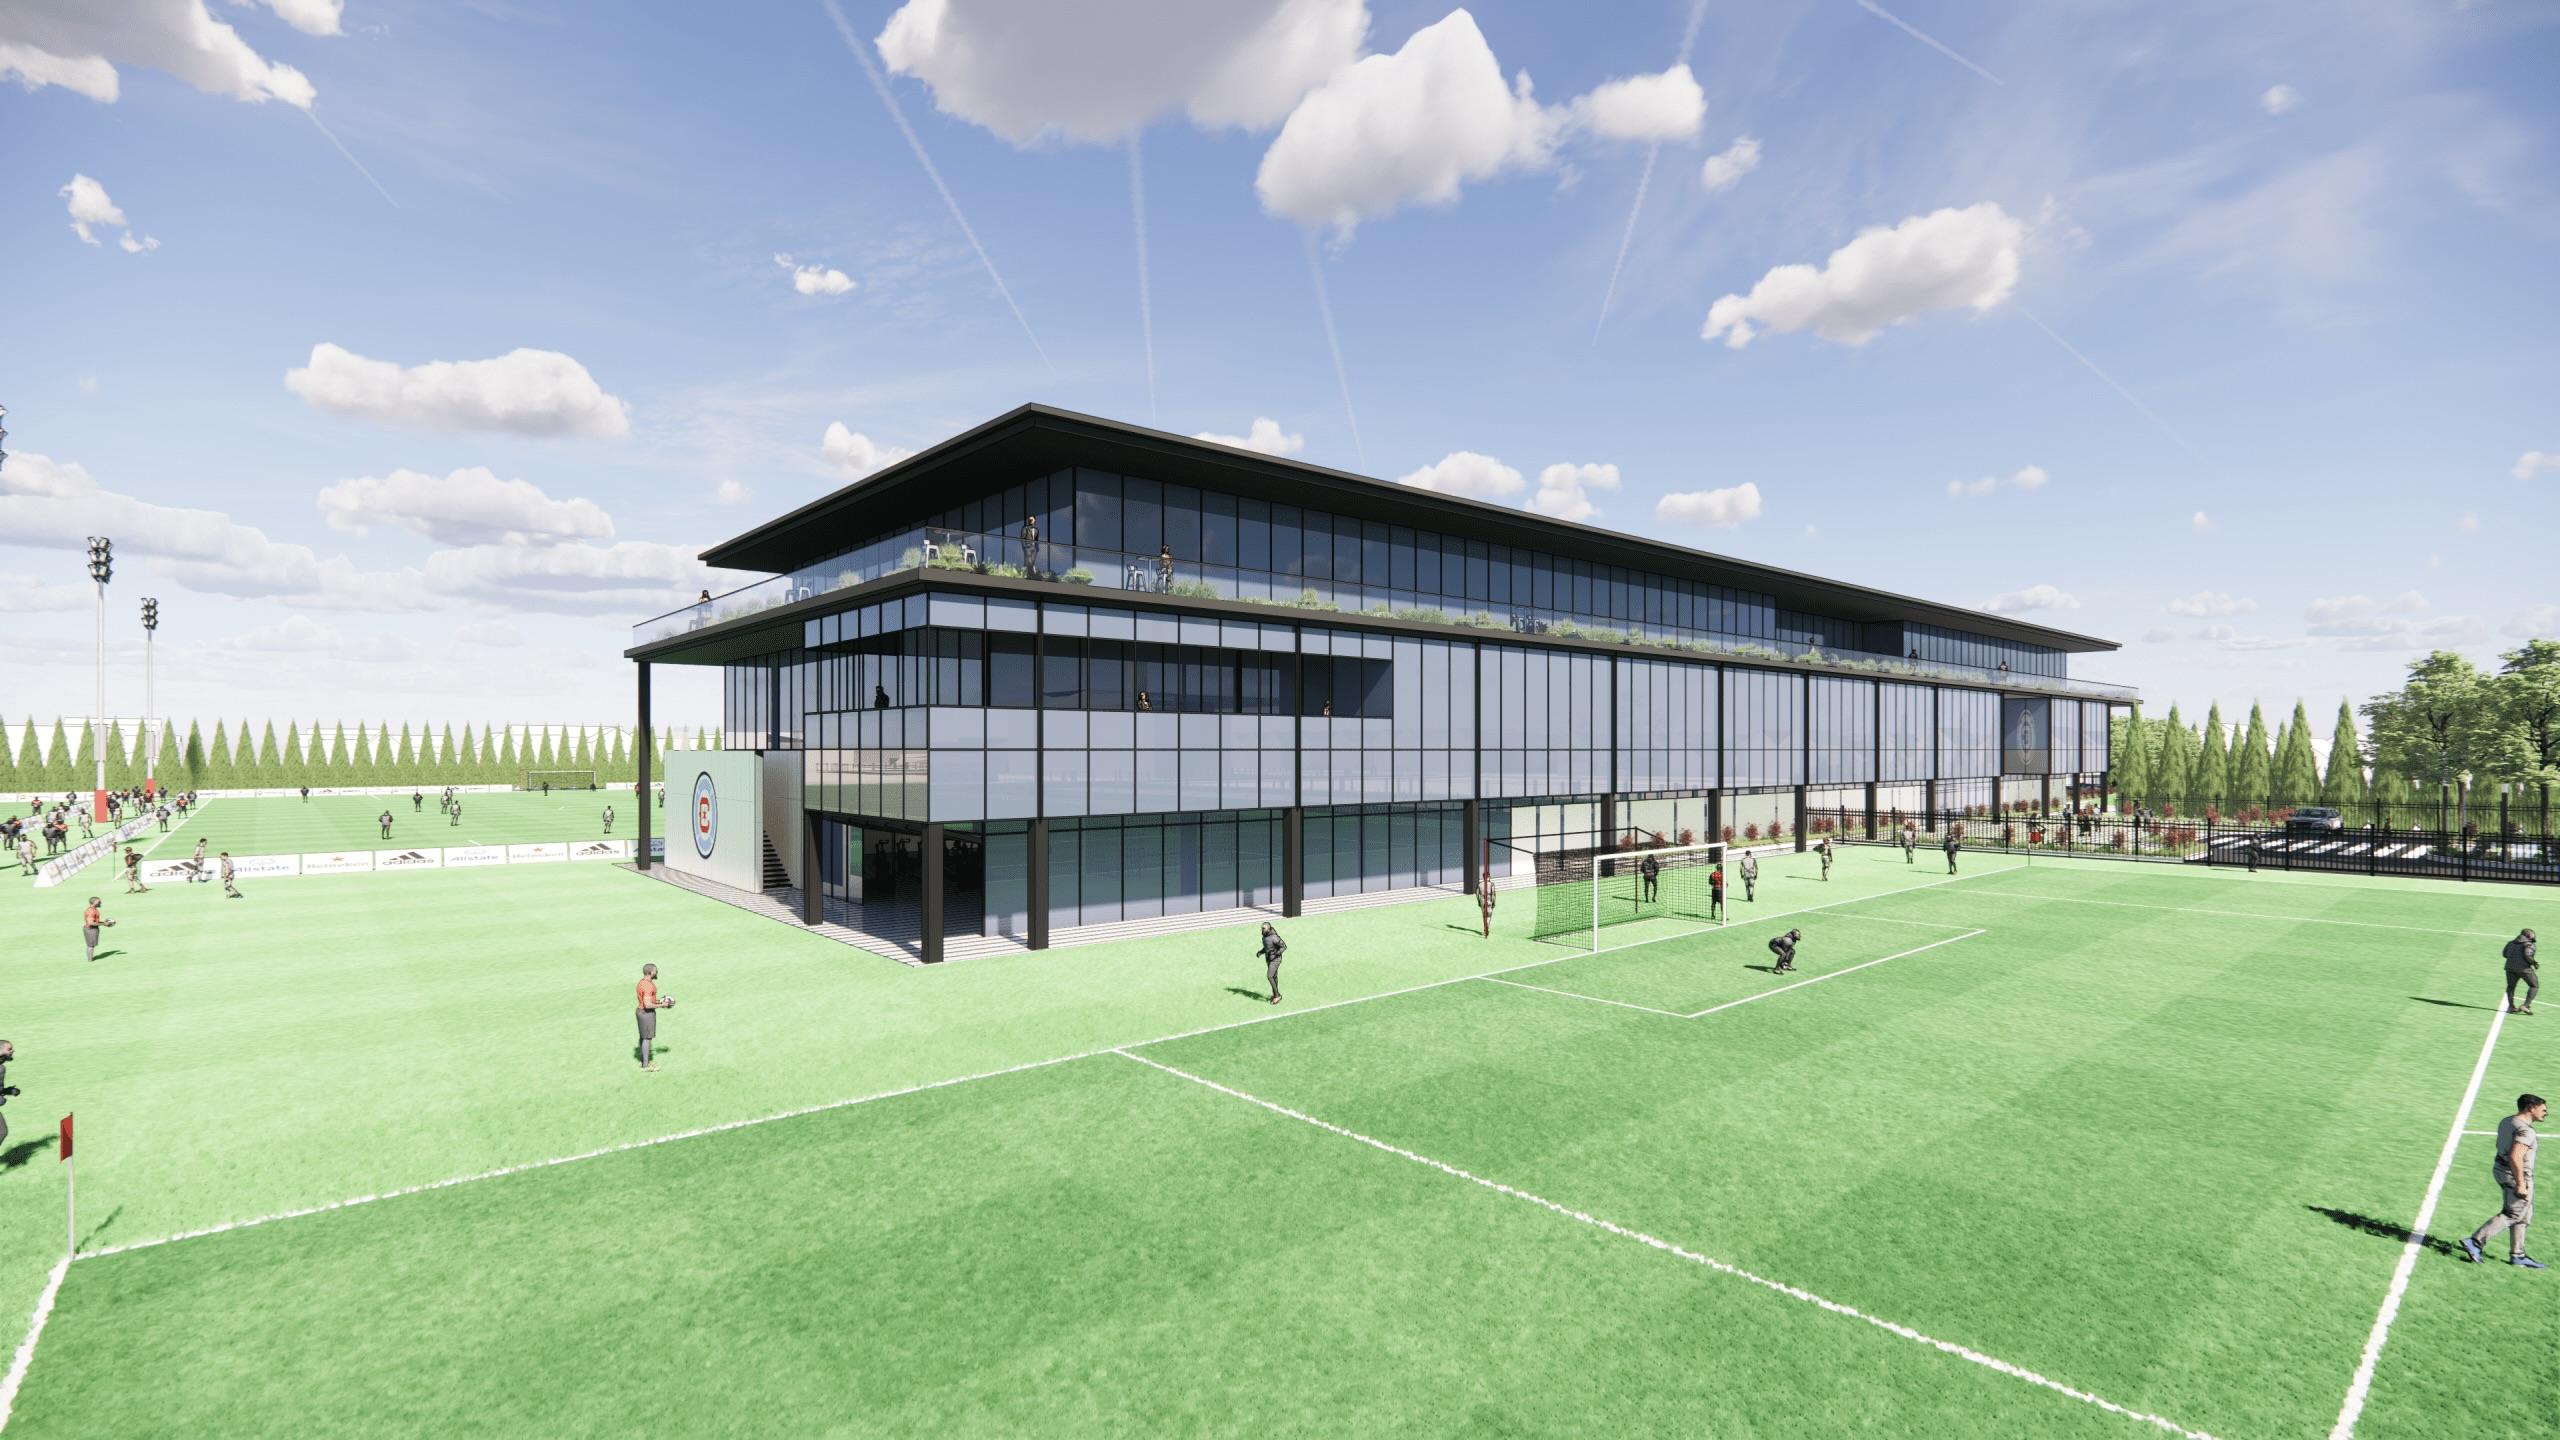 A rendering of the proposed training facility for the Chicago Fire on the city's Near West Side. (Provided)